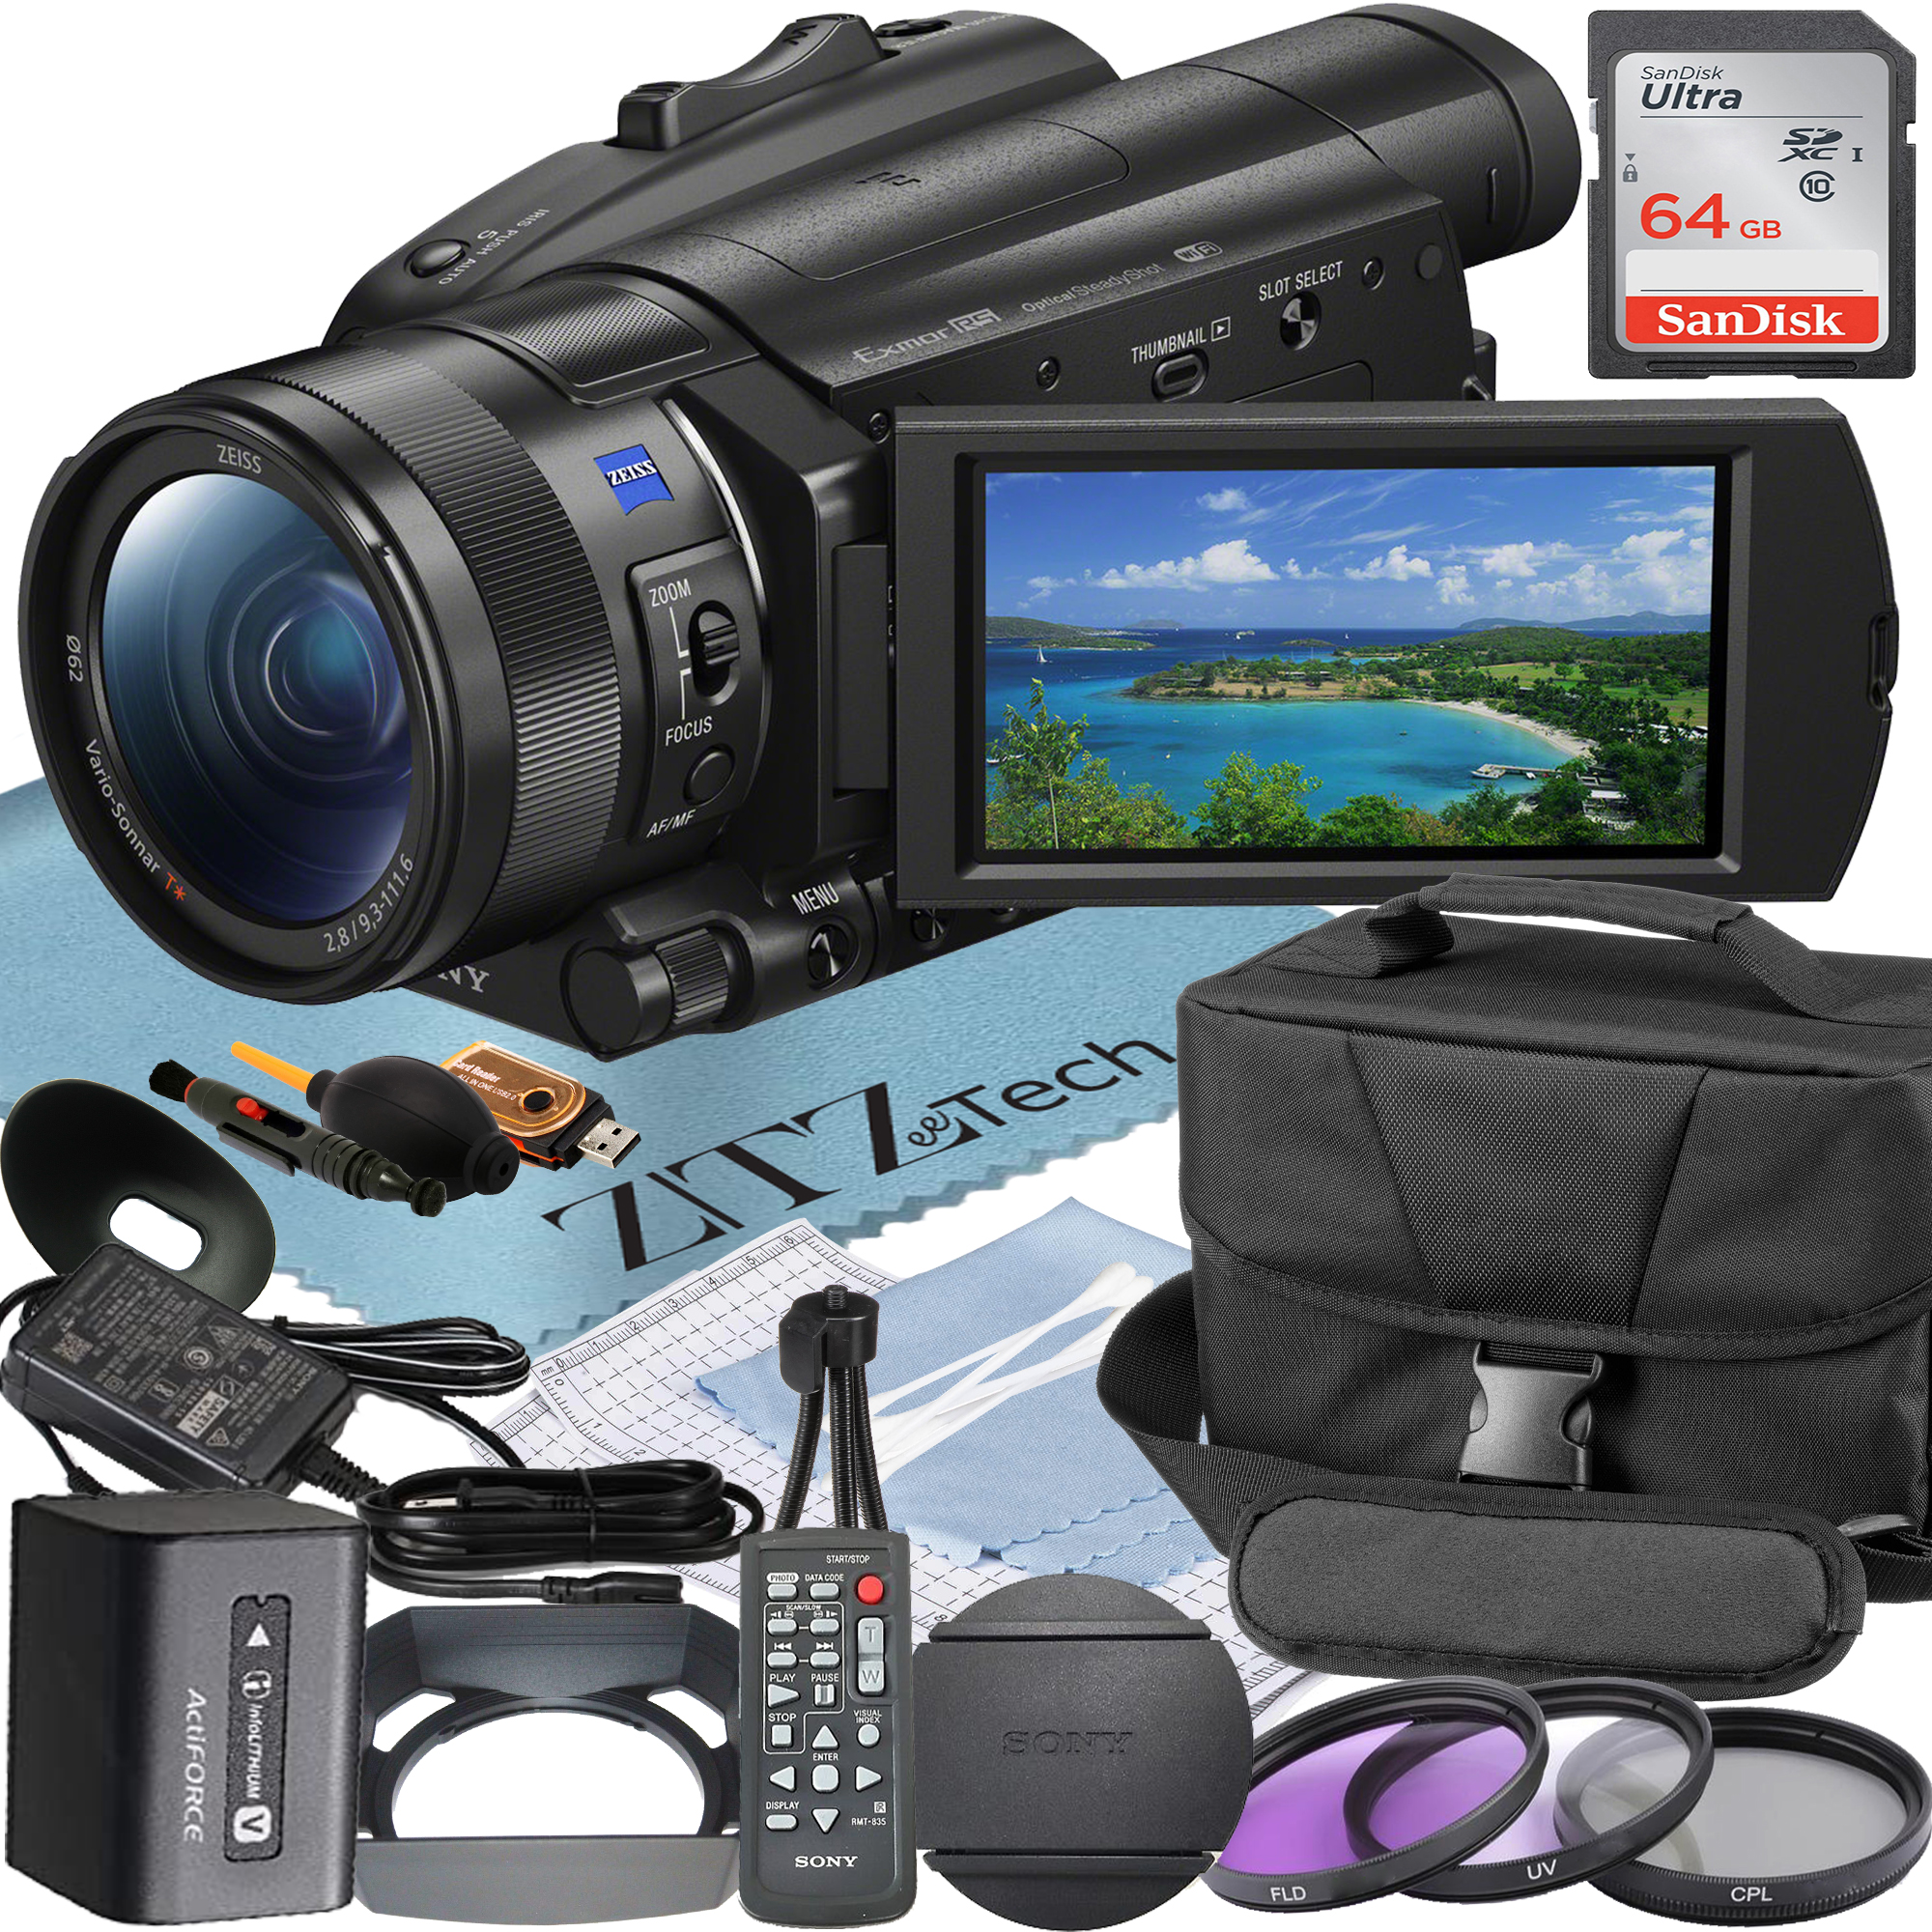 Sony FDR-AX700 4K HDR Camcorder with 64GB SanDisk Memory Card + Case + Filter Kit + ZeeTech Accessory Bundle